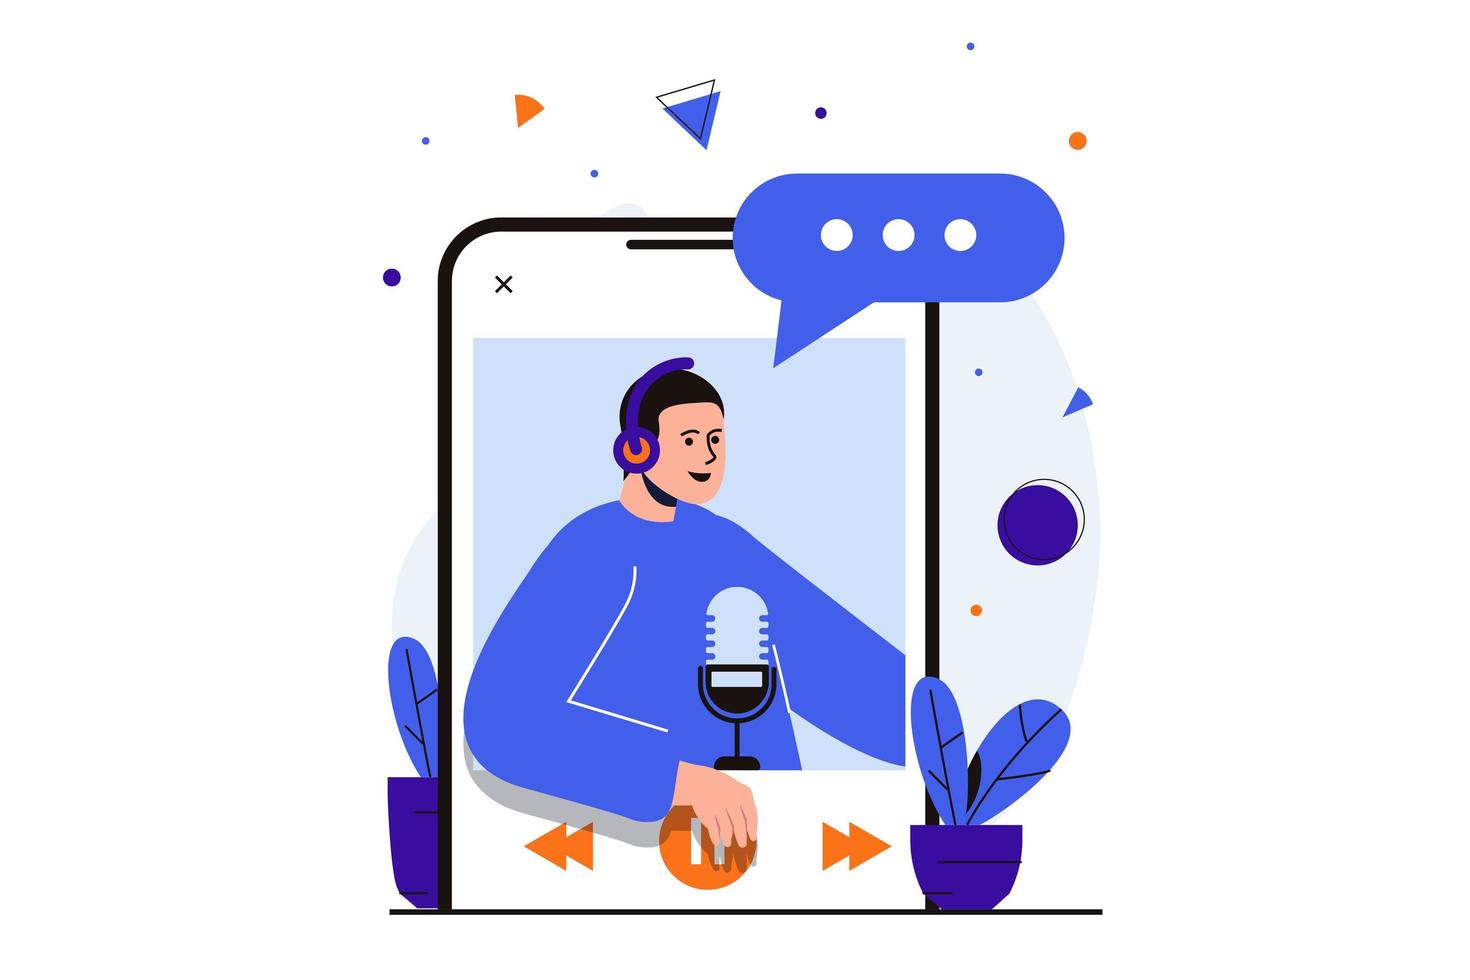 Podcast streaming modern flat concept for web banner design. Man is broadcasting live, talking into microphone. Listening to audio podcasts in app. Vector illustration with isolated people scene